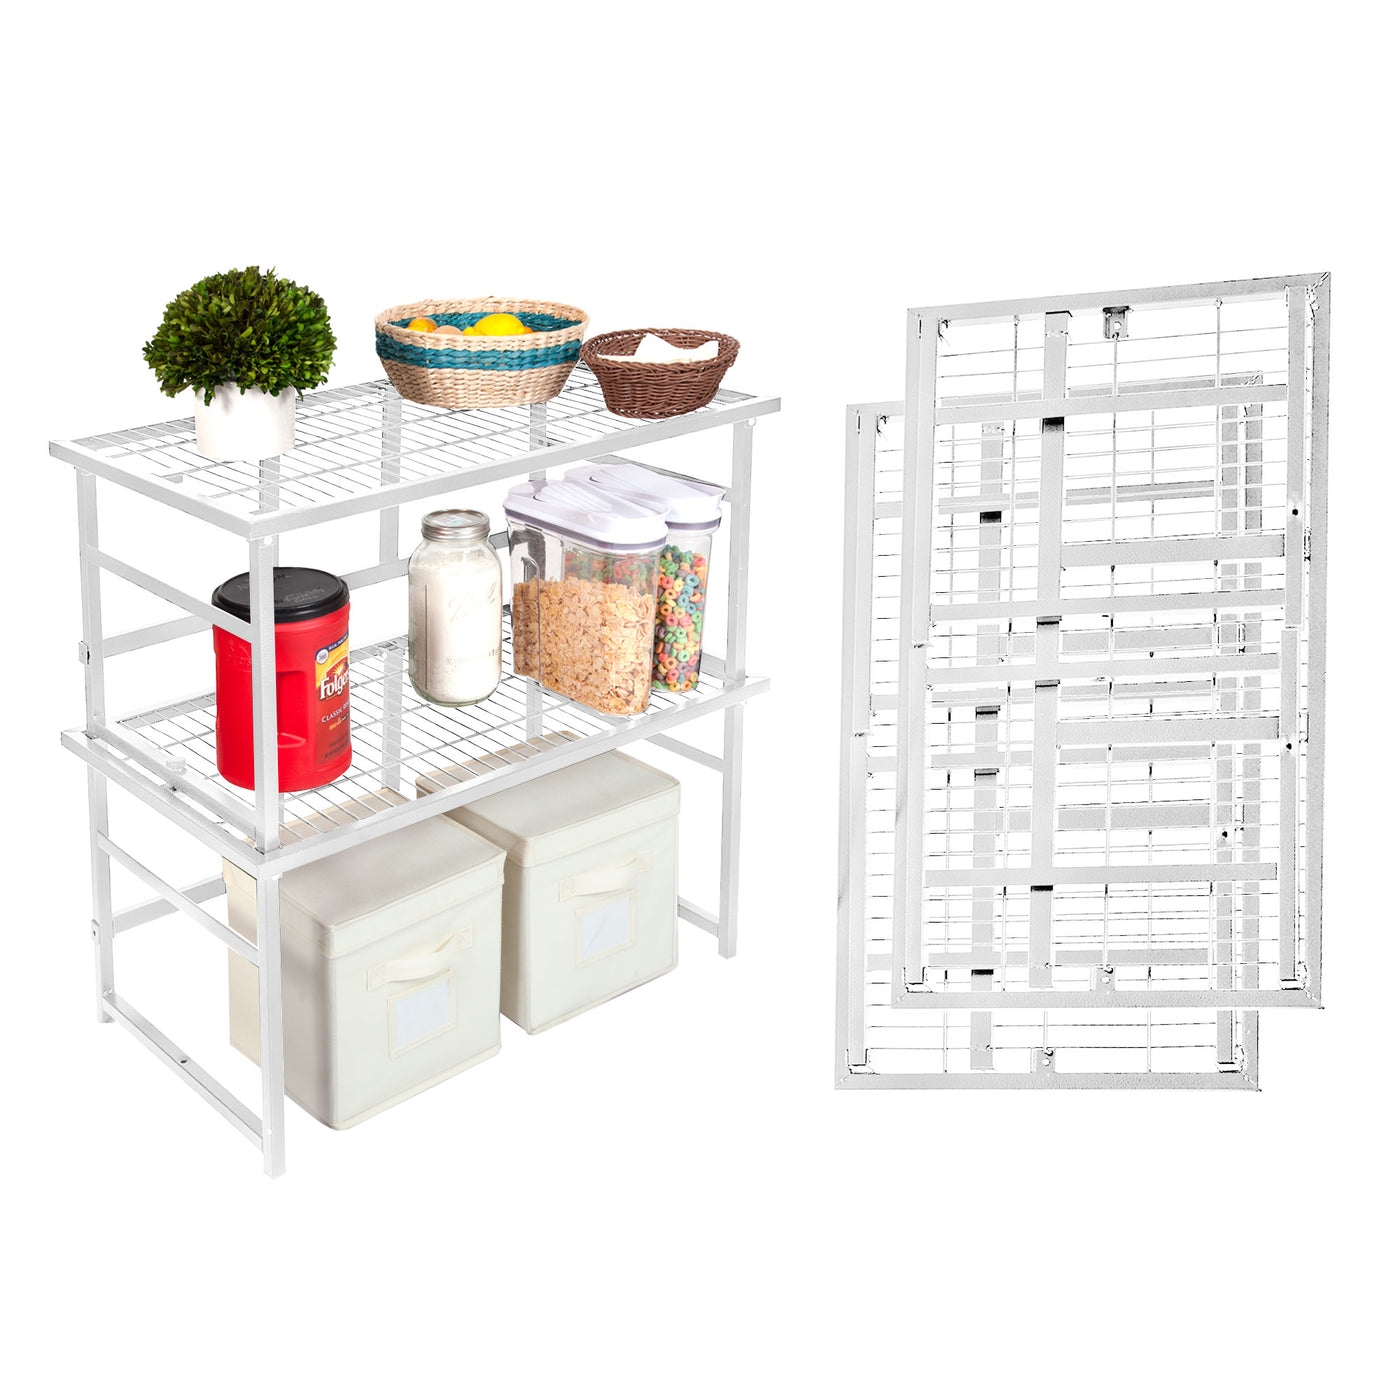 Origami R1 Series: Stackable & Foldable Storage Rack - (2-Pack)